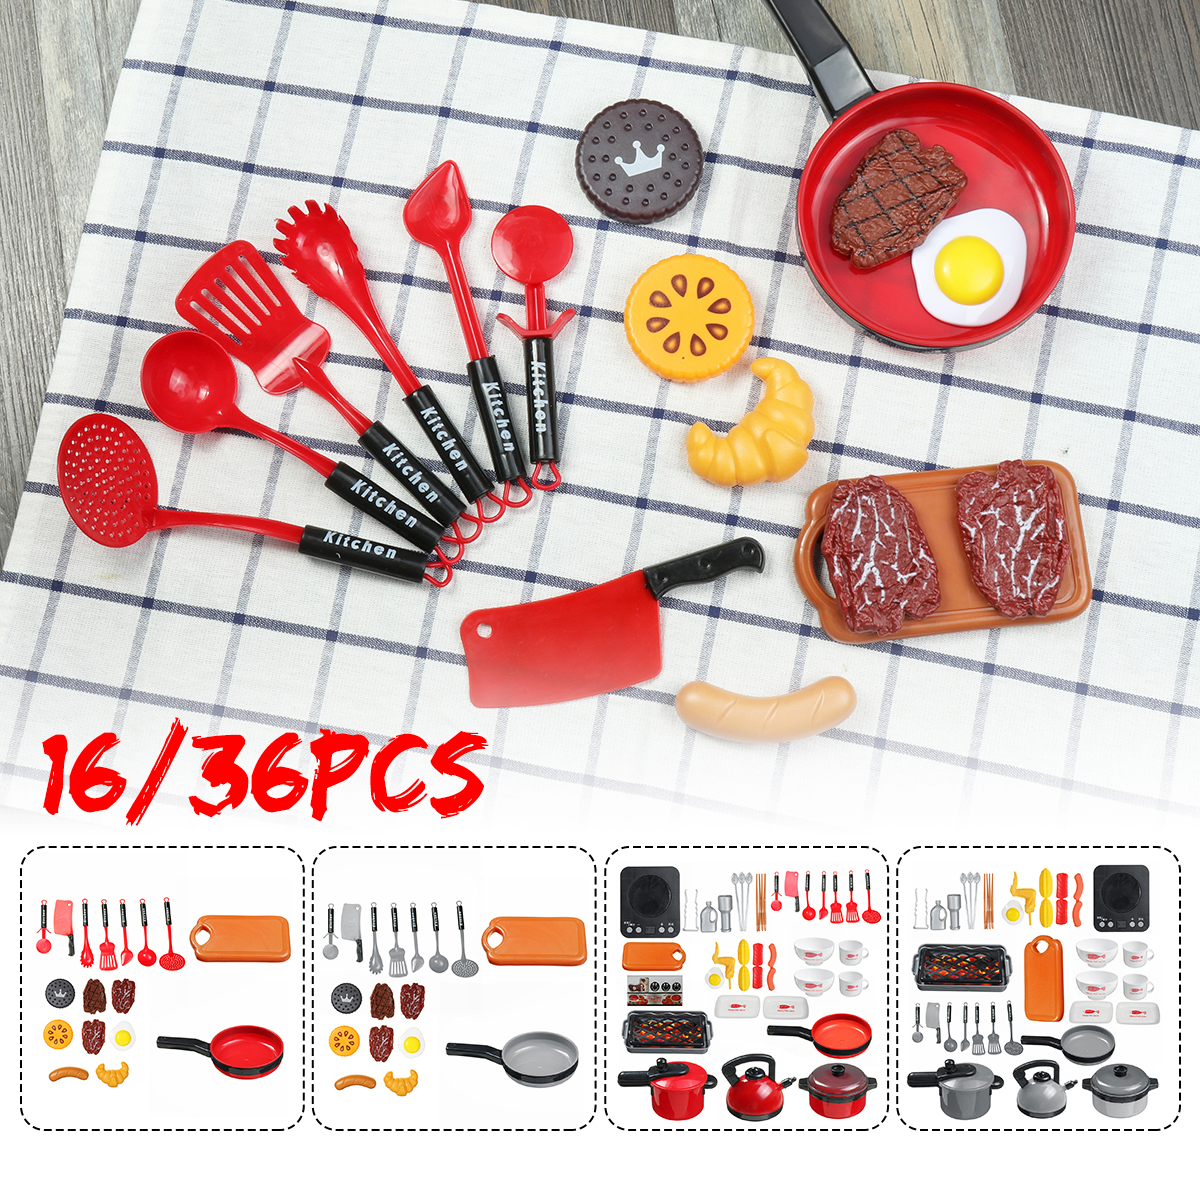 1636-Pcs-Kid-Play-House-Toy-ABS-Plastic-Kitchen-Cooking-Pots-Pans-Food-Dishes-Cookware-Toys-1627711-2